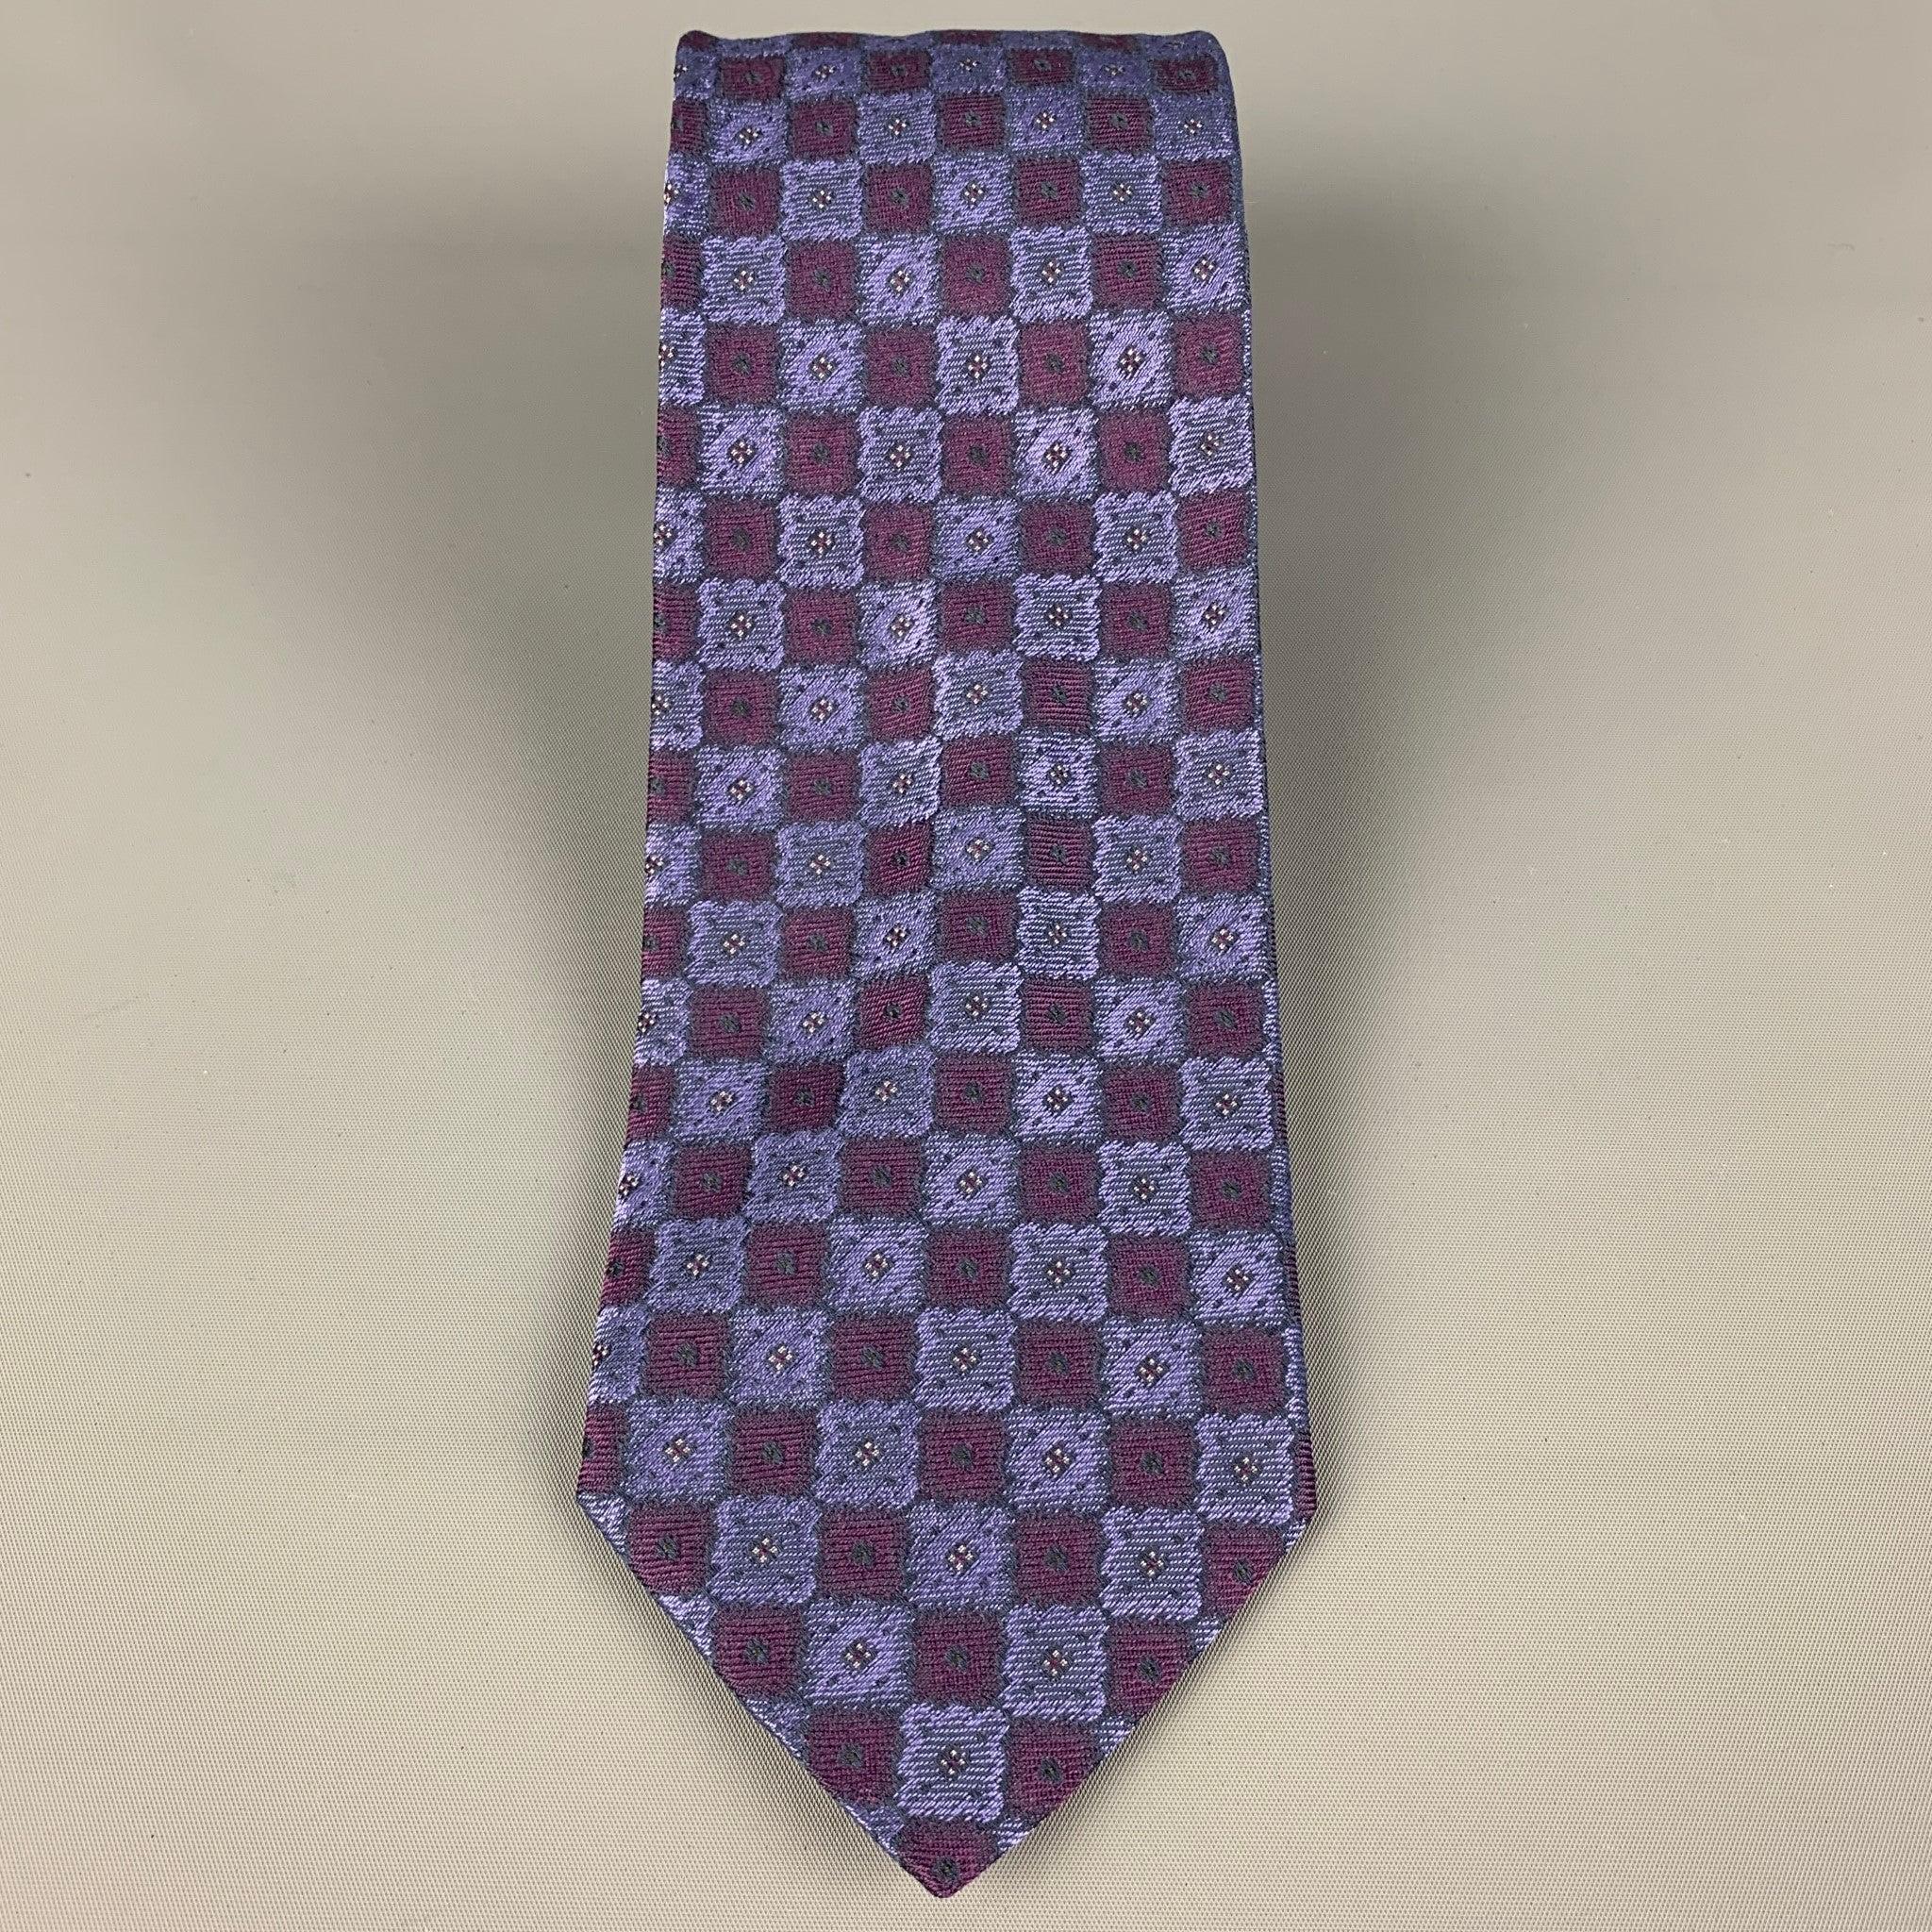 WILKES BASHFORD
necktie comes in a purple & burgundy silk with a all over square print. Made in Italy. Very Good Pre-Owned Condition.Width: 3.75 inches  Length: 62 inches 
  
  
 
Reference: 120417
Category: Tie
More Details
    
Brand:  WILKES